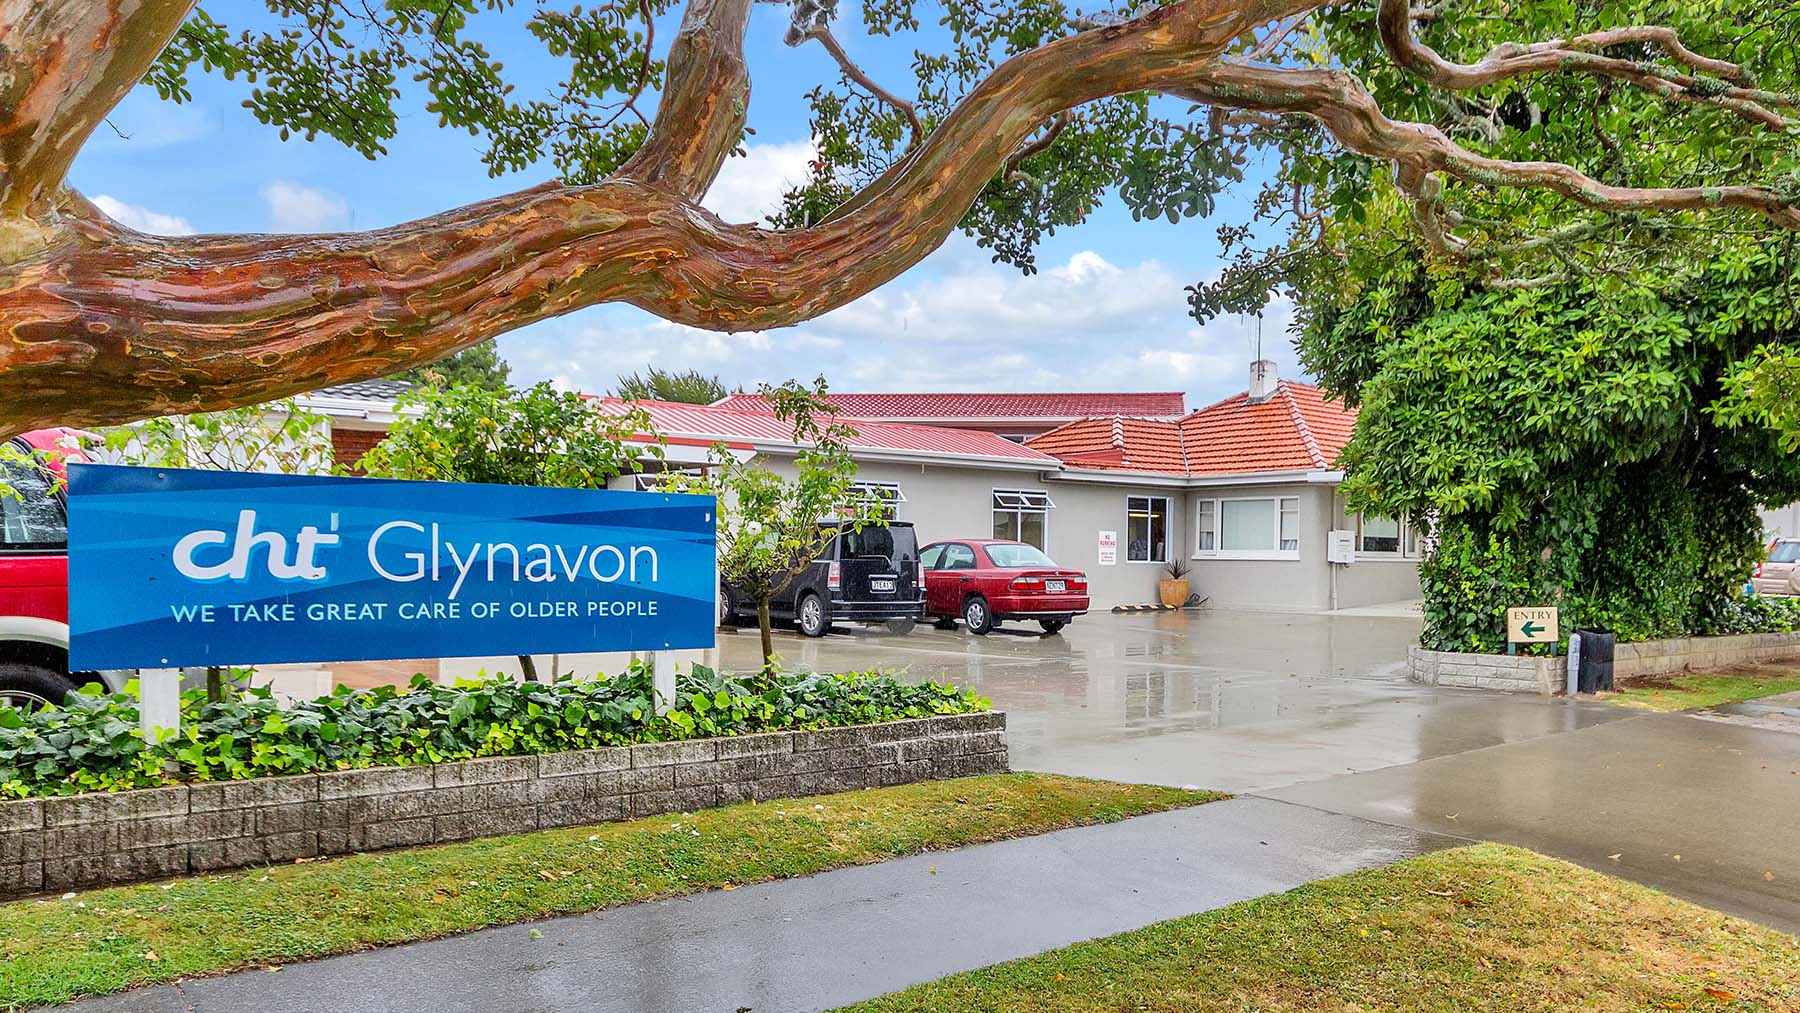 CHT Glynavon Care Home